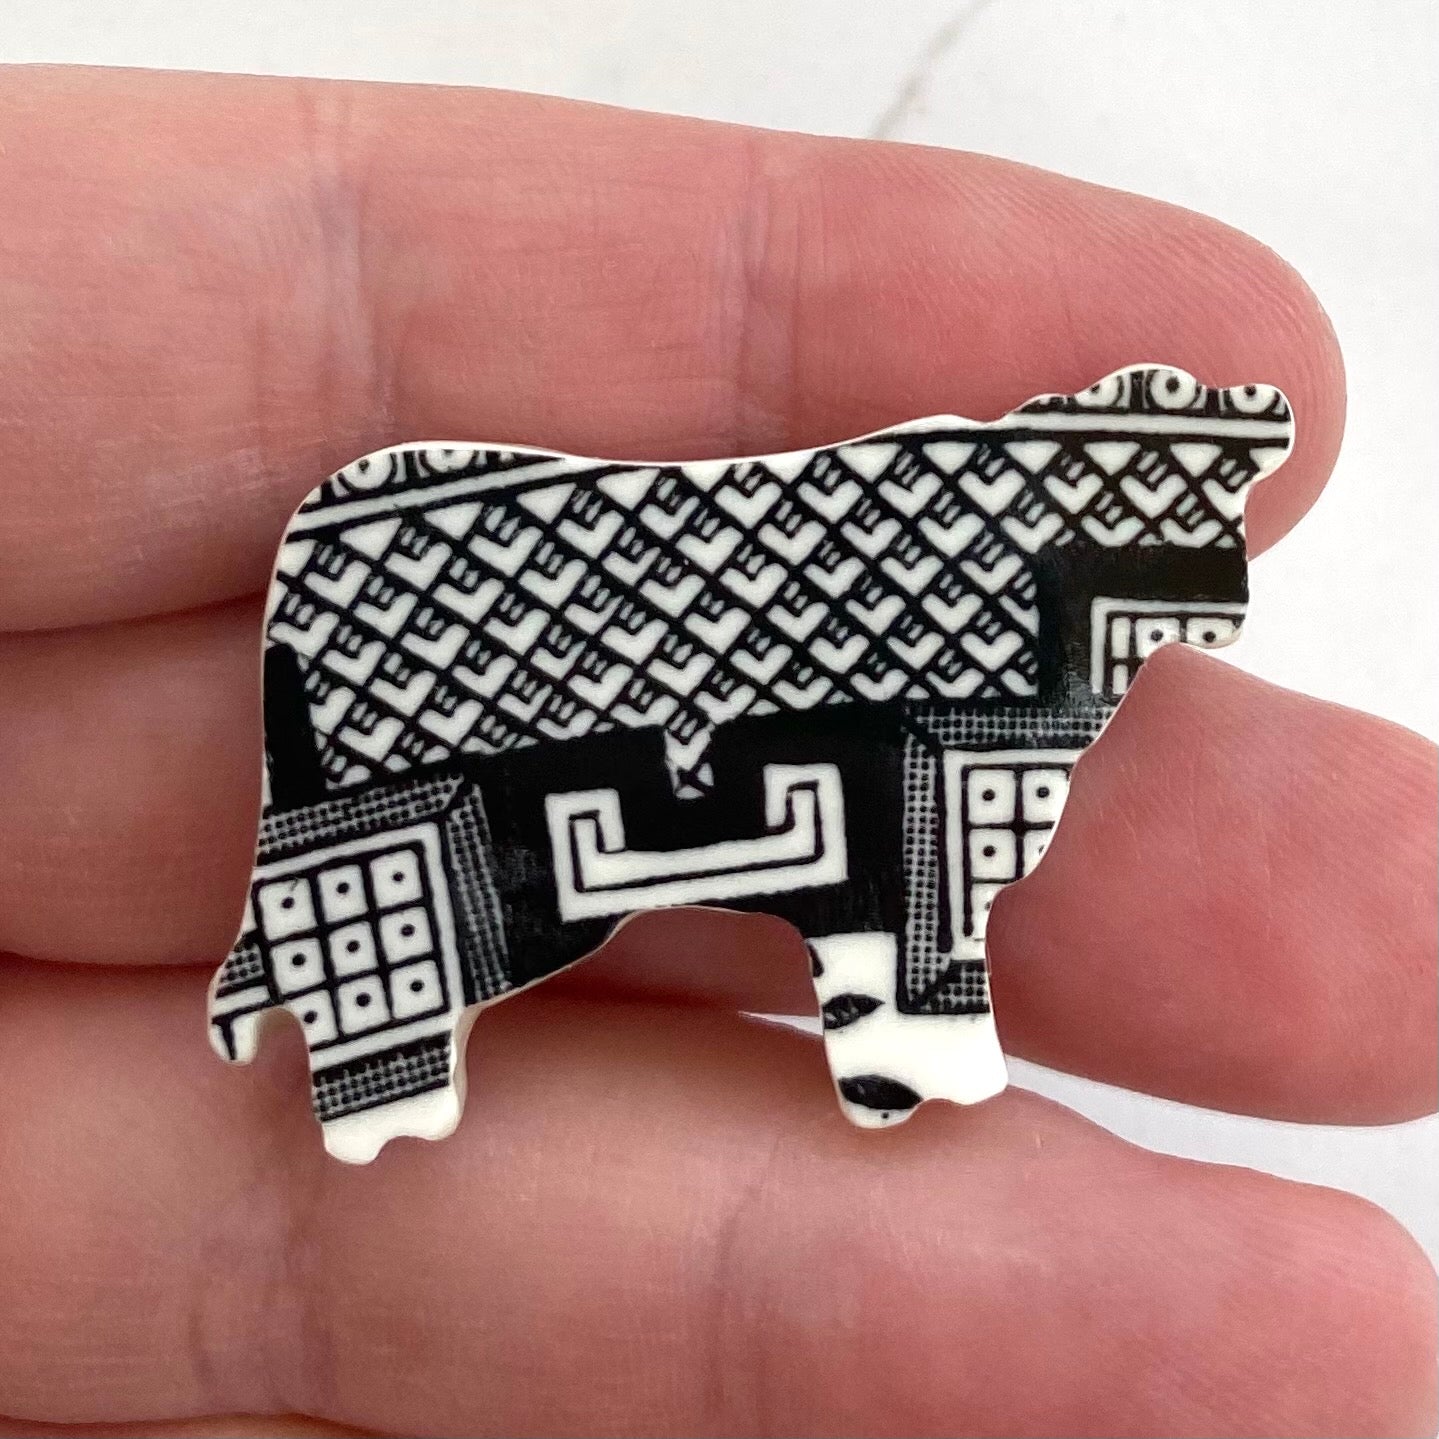 50% off! Midnight Willow cow brooch